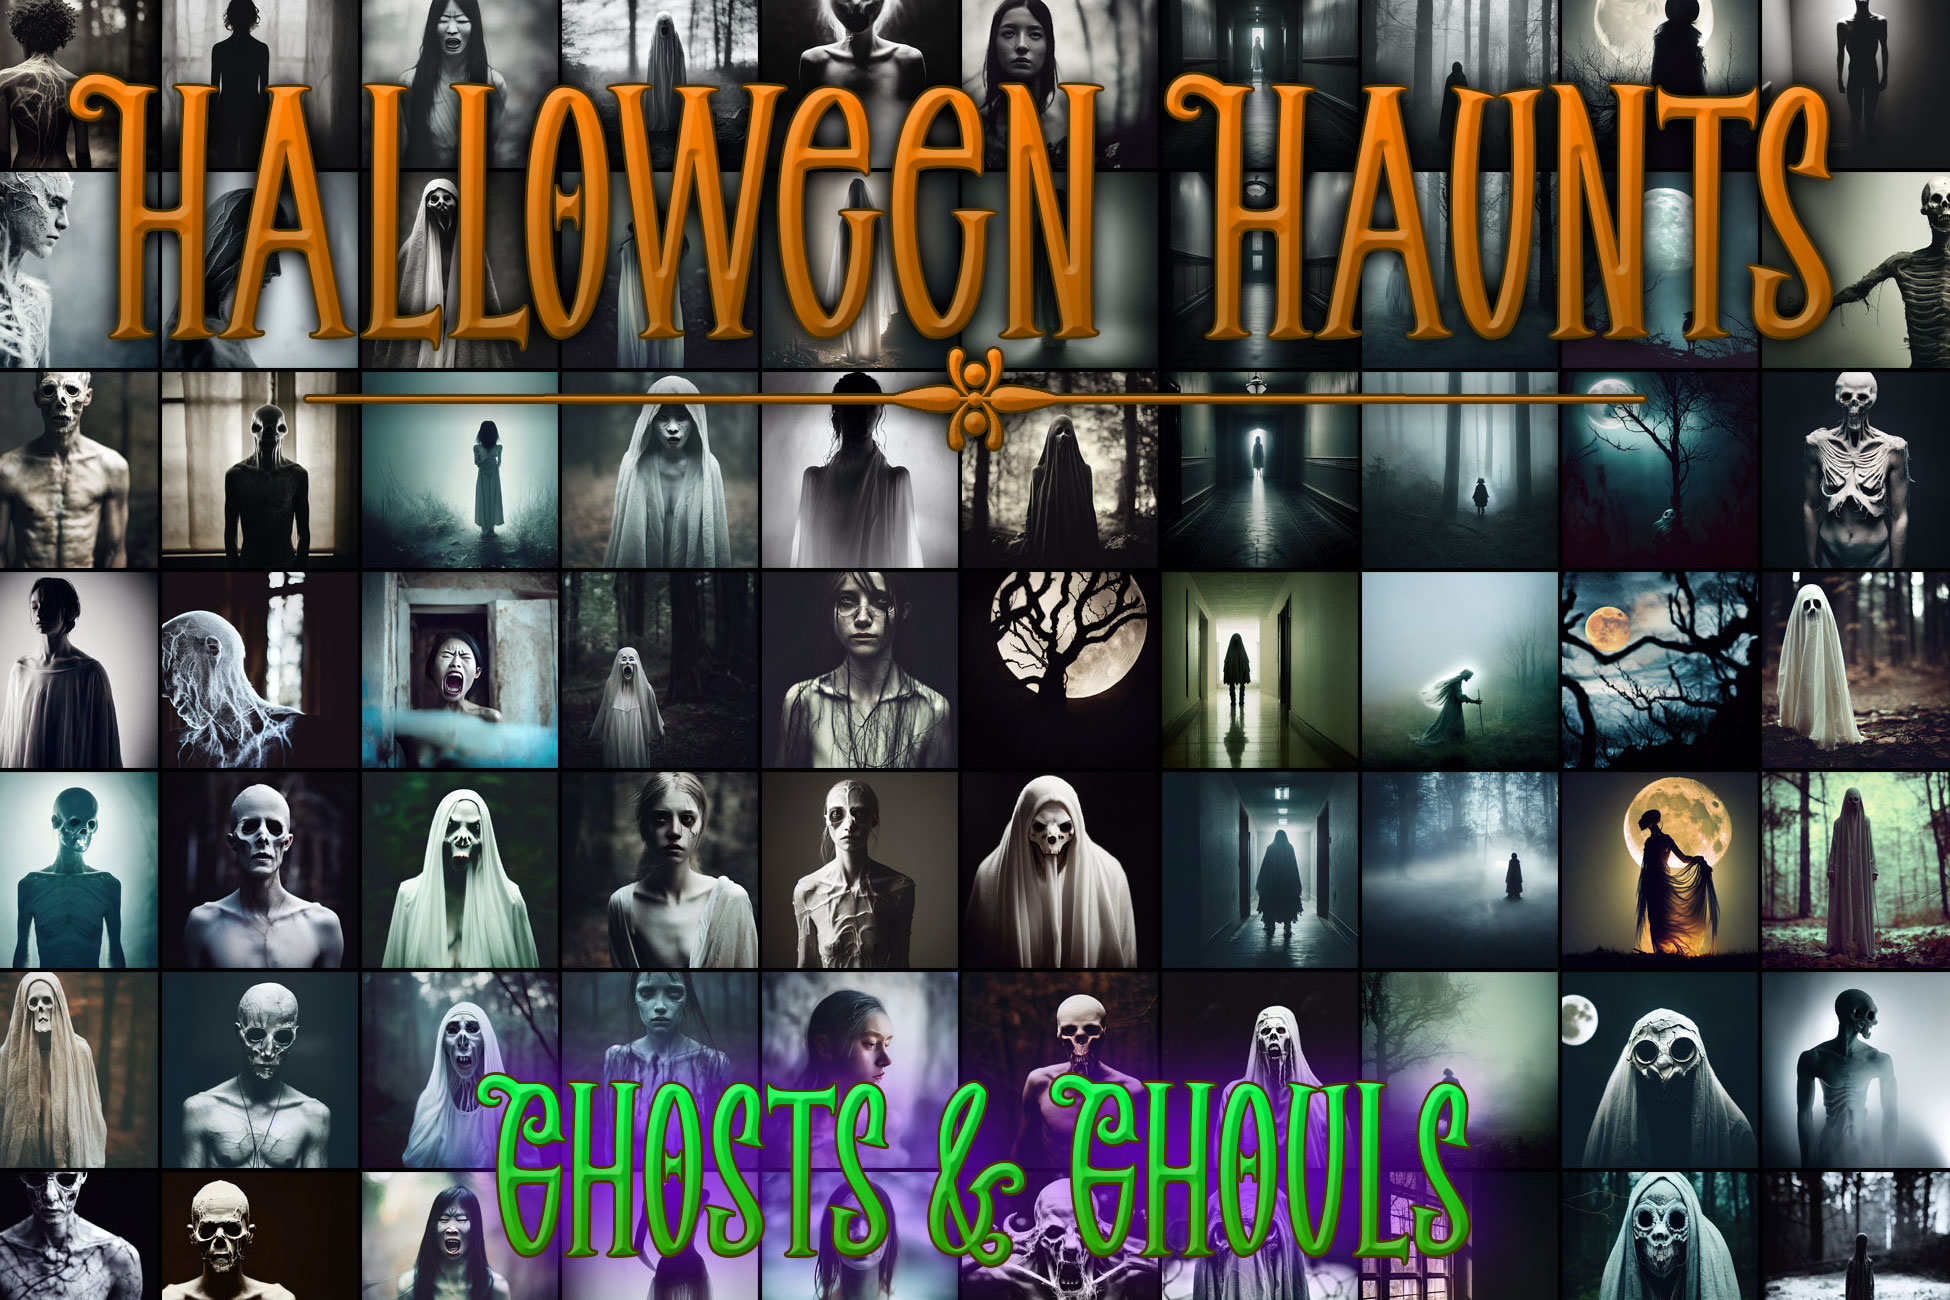 Halloween Haunts - Ghosts & Ghouls Icon Pack for RPG / Fantasy Games